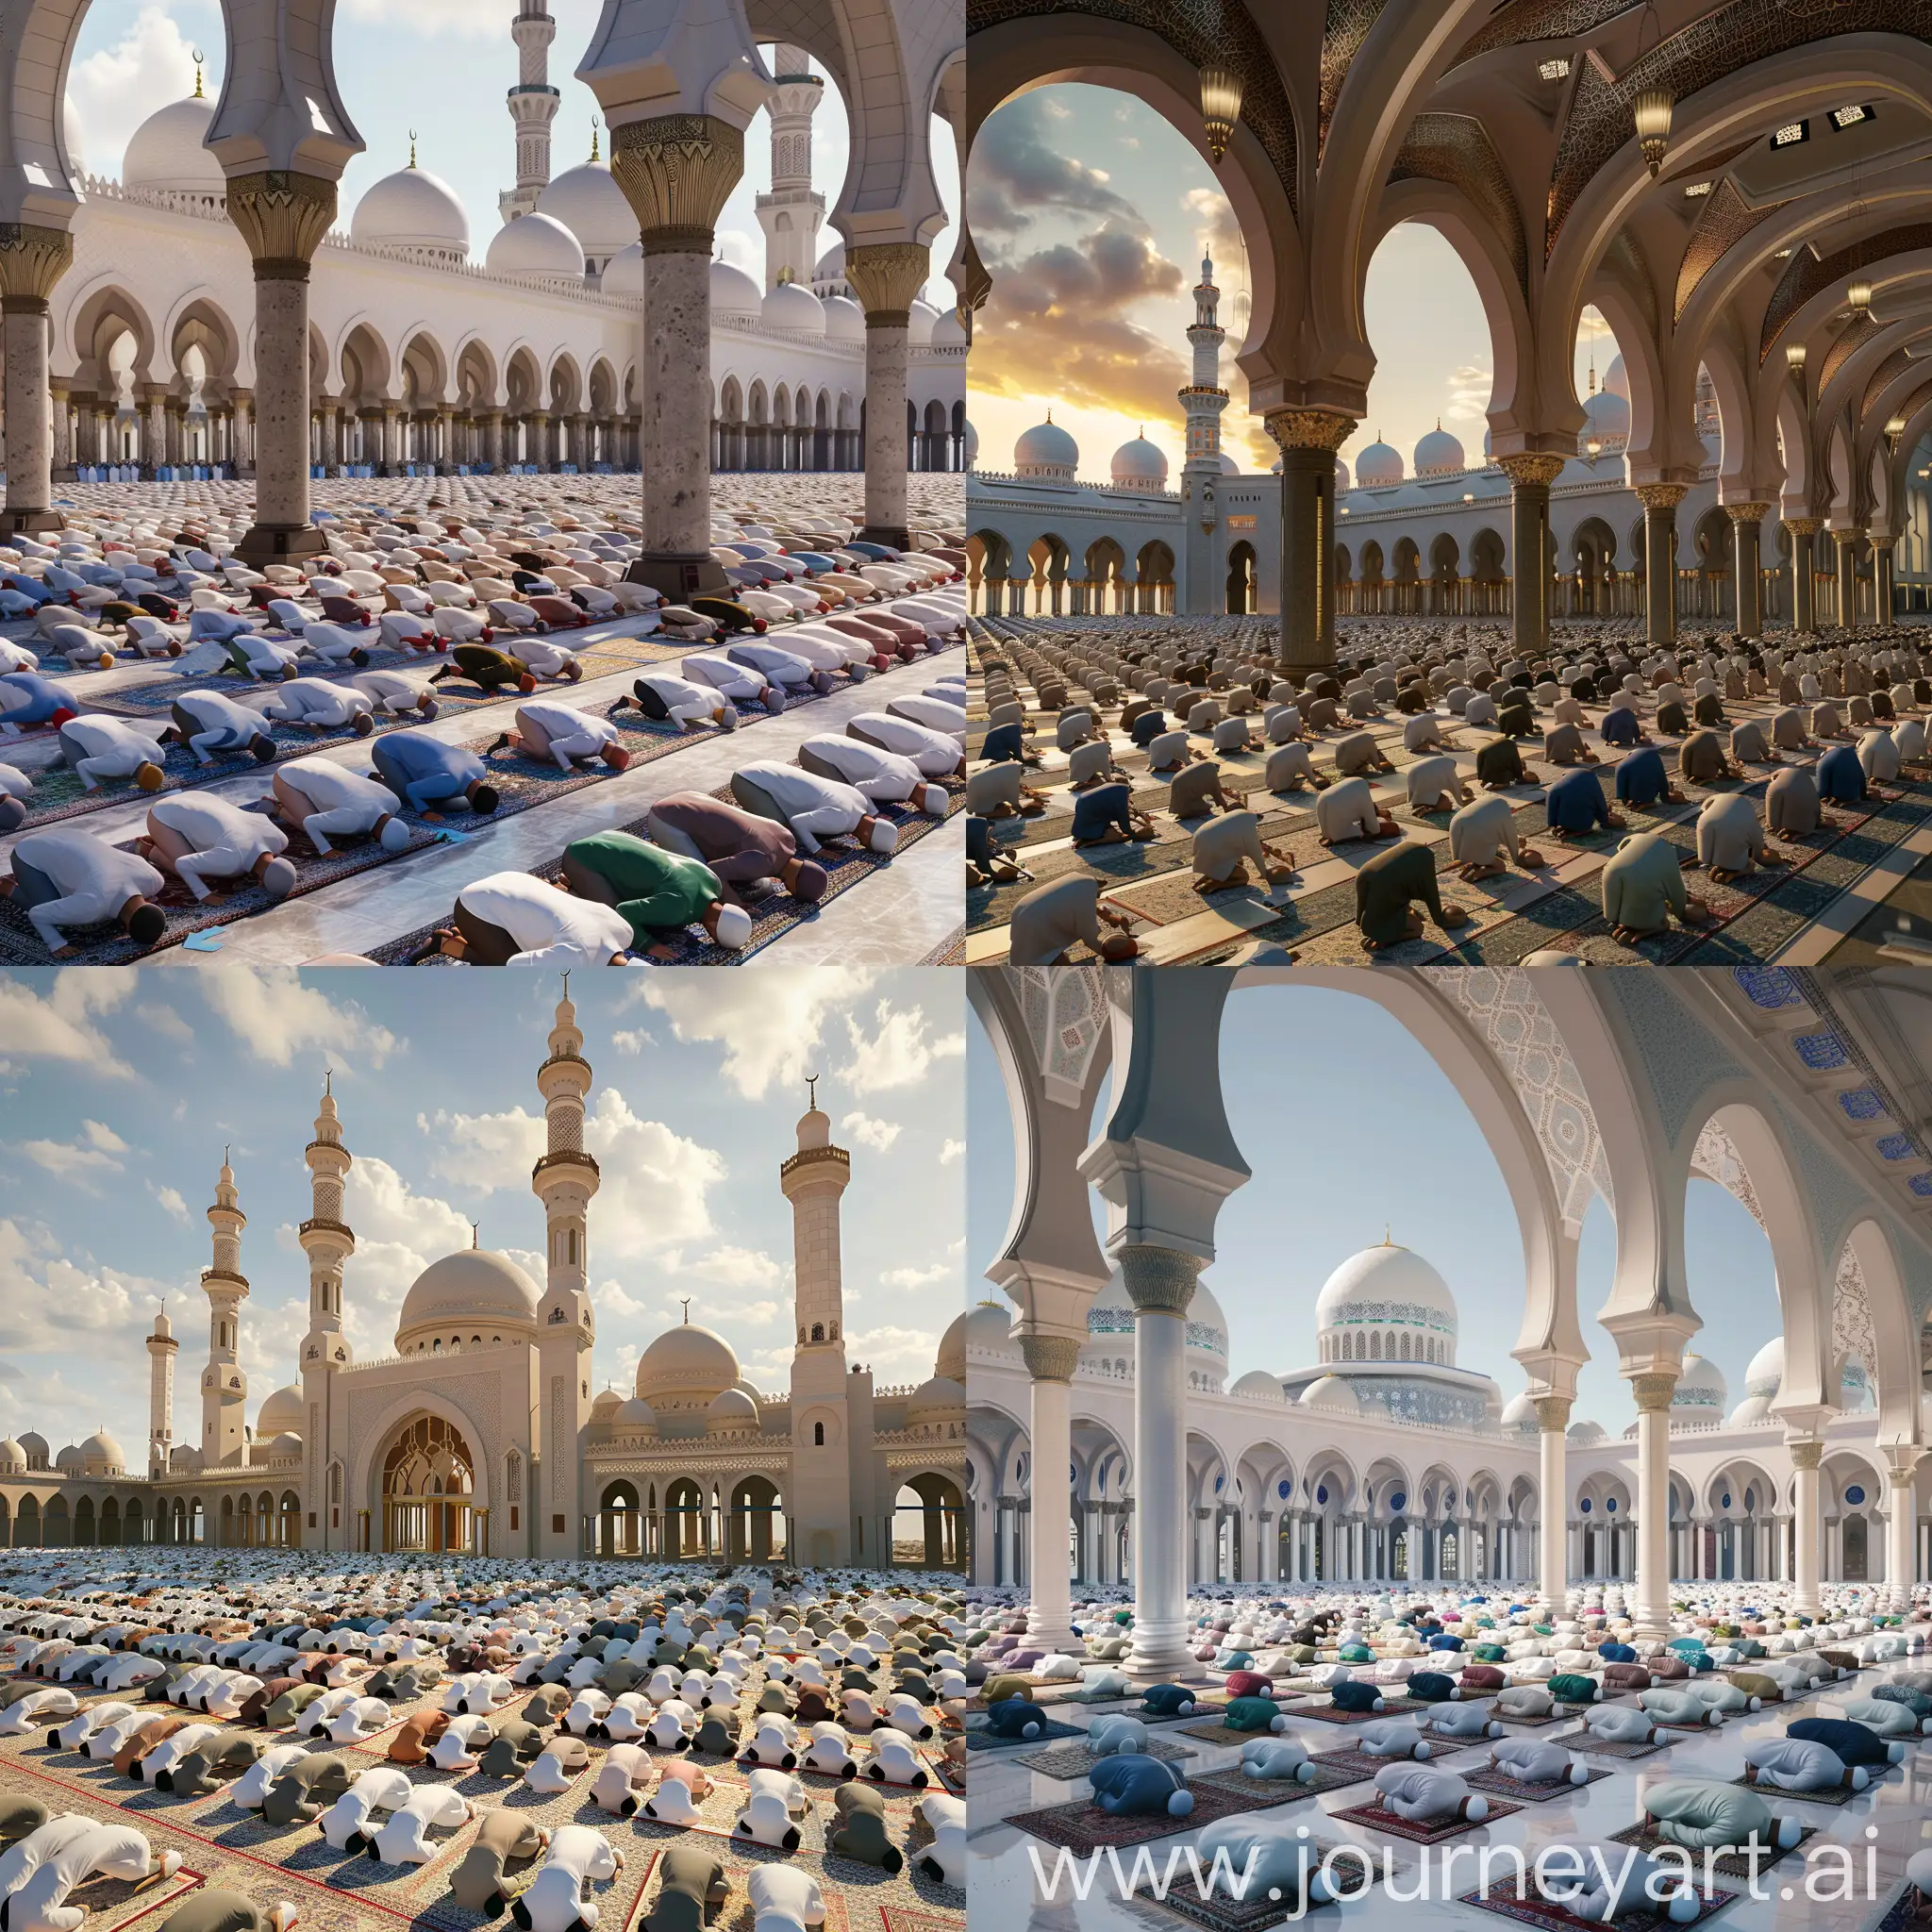 Muslims-Praying-in-Al-Aqsa-Mosque-Under-Open-Sky-Ultra-HD-3D-Cinematic-View